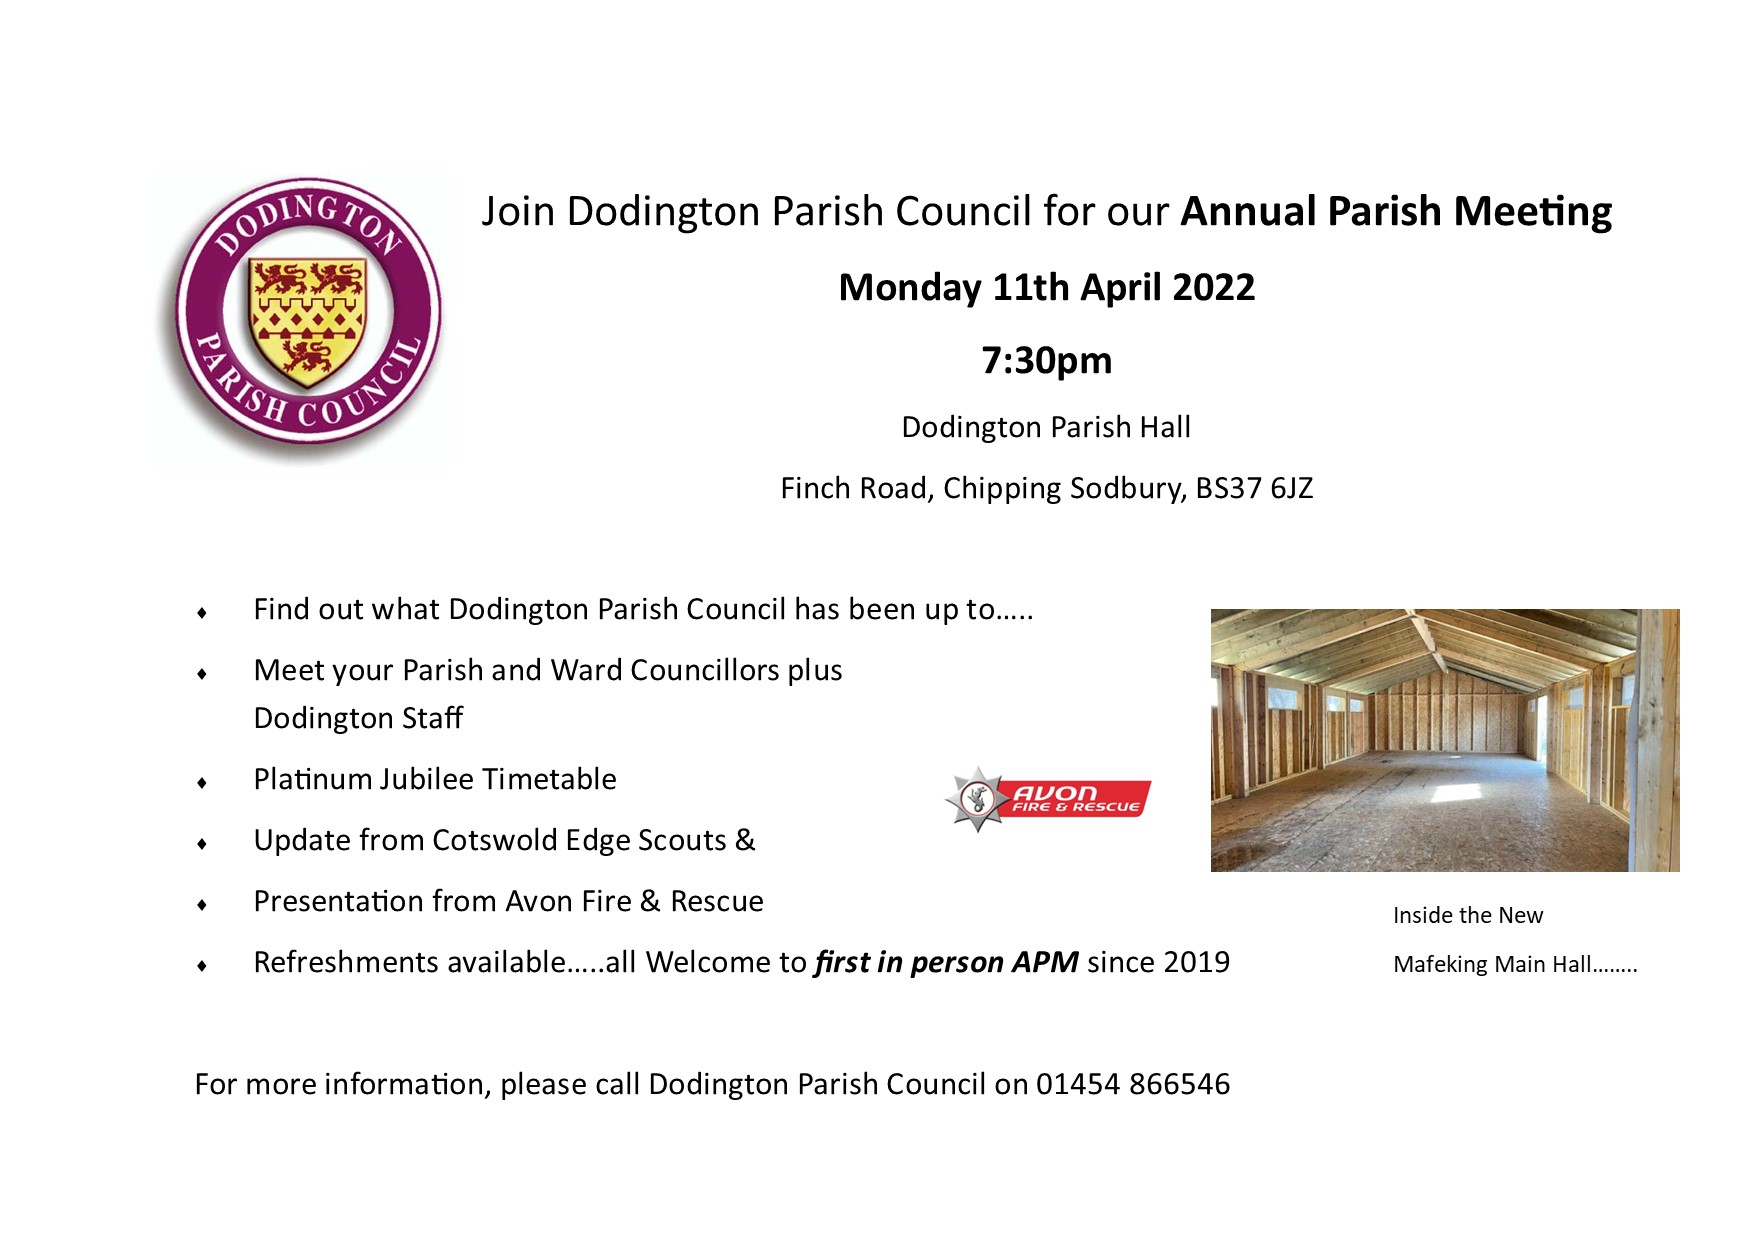 Poster with details of upcoming Annual Parish Meeting on 11 April 2022 please call office on 01454 866546 for details